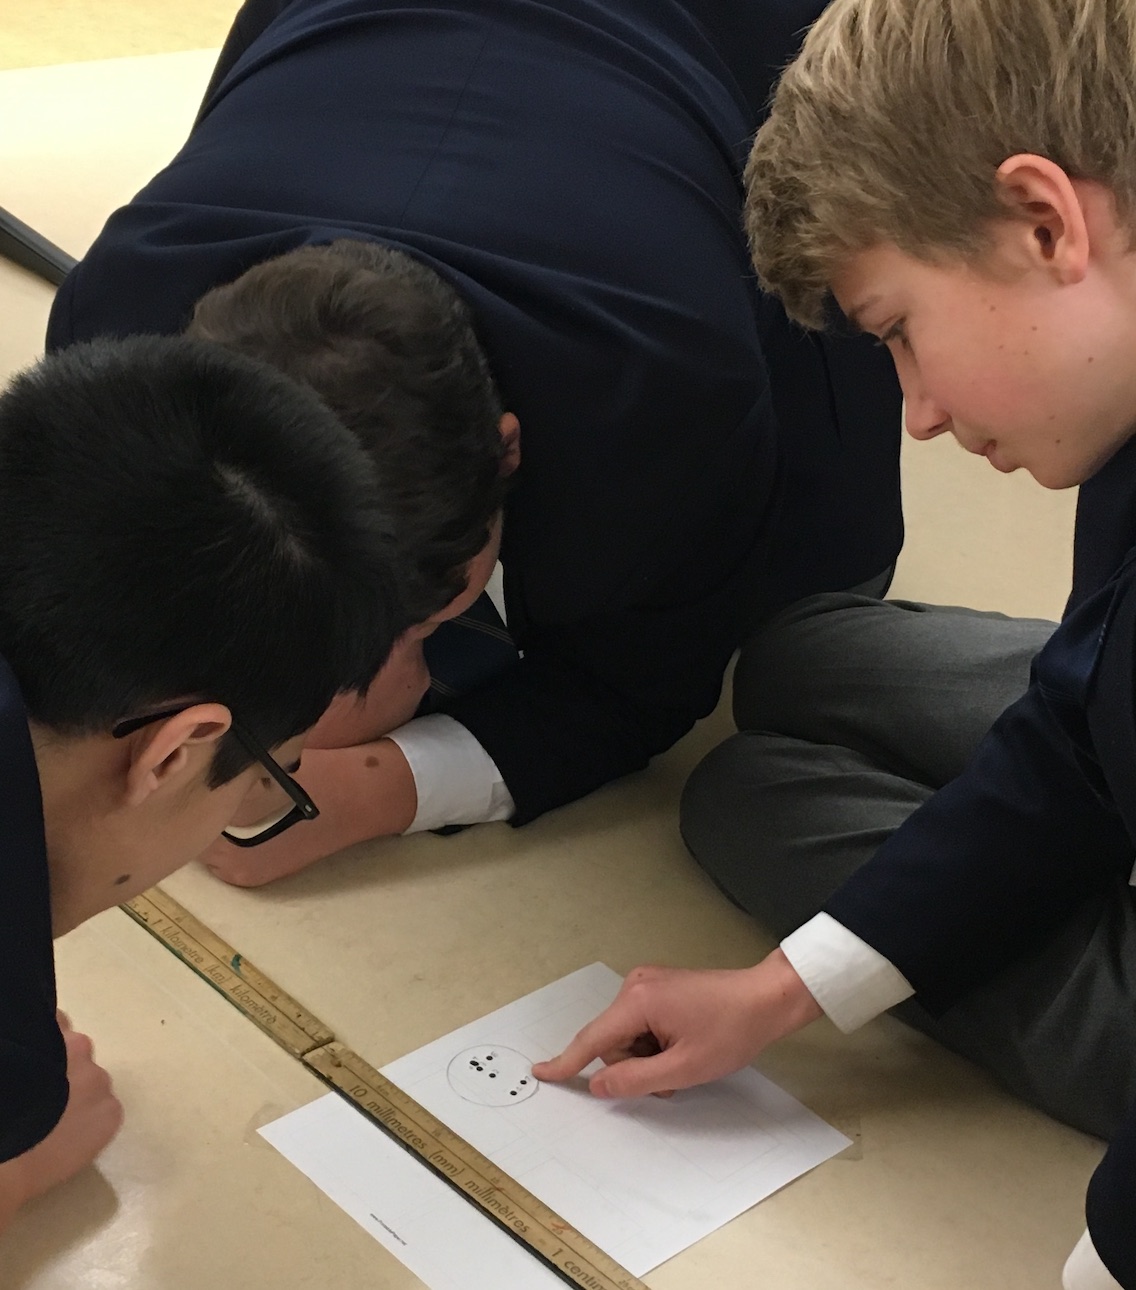 Students work together to determine the where the ball bearing hits the ground.